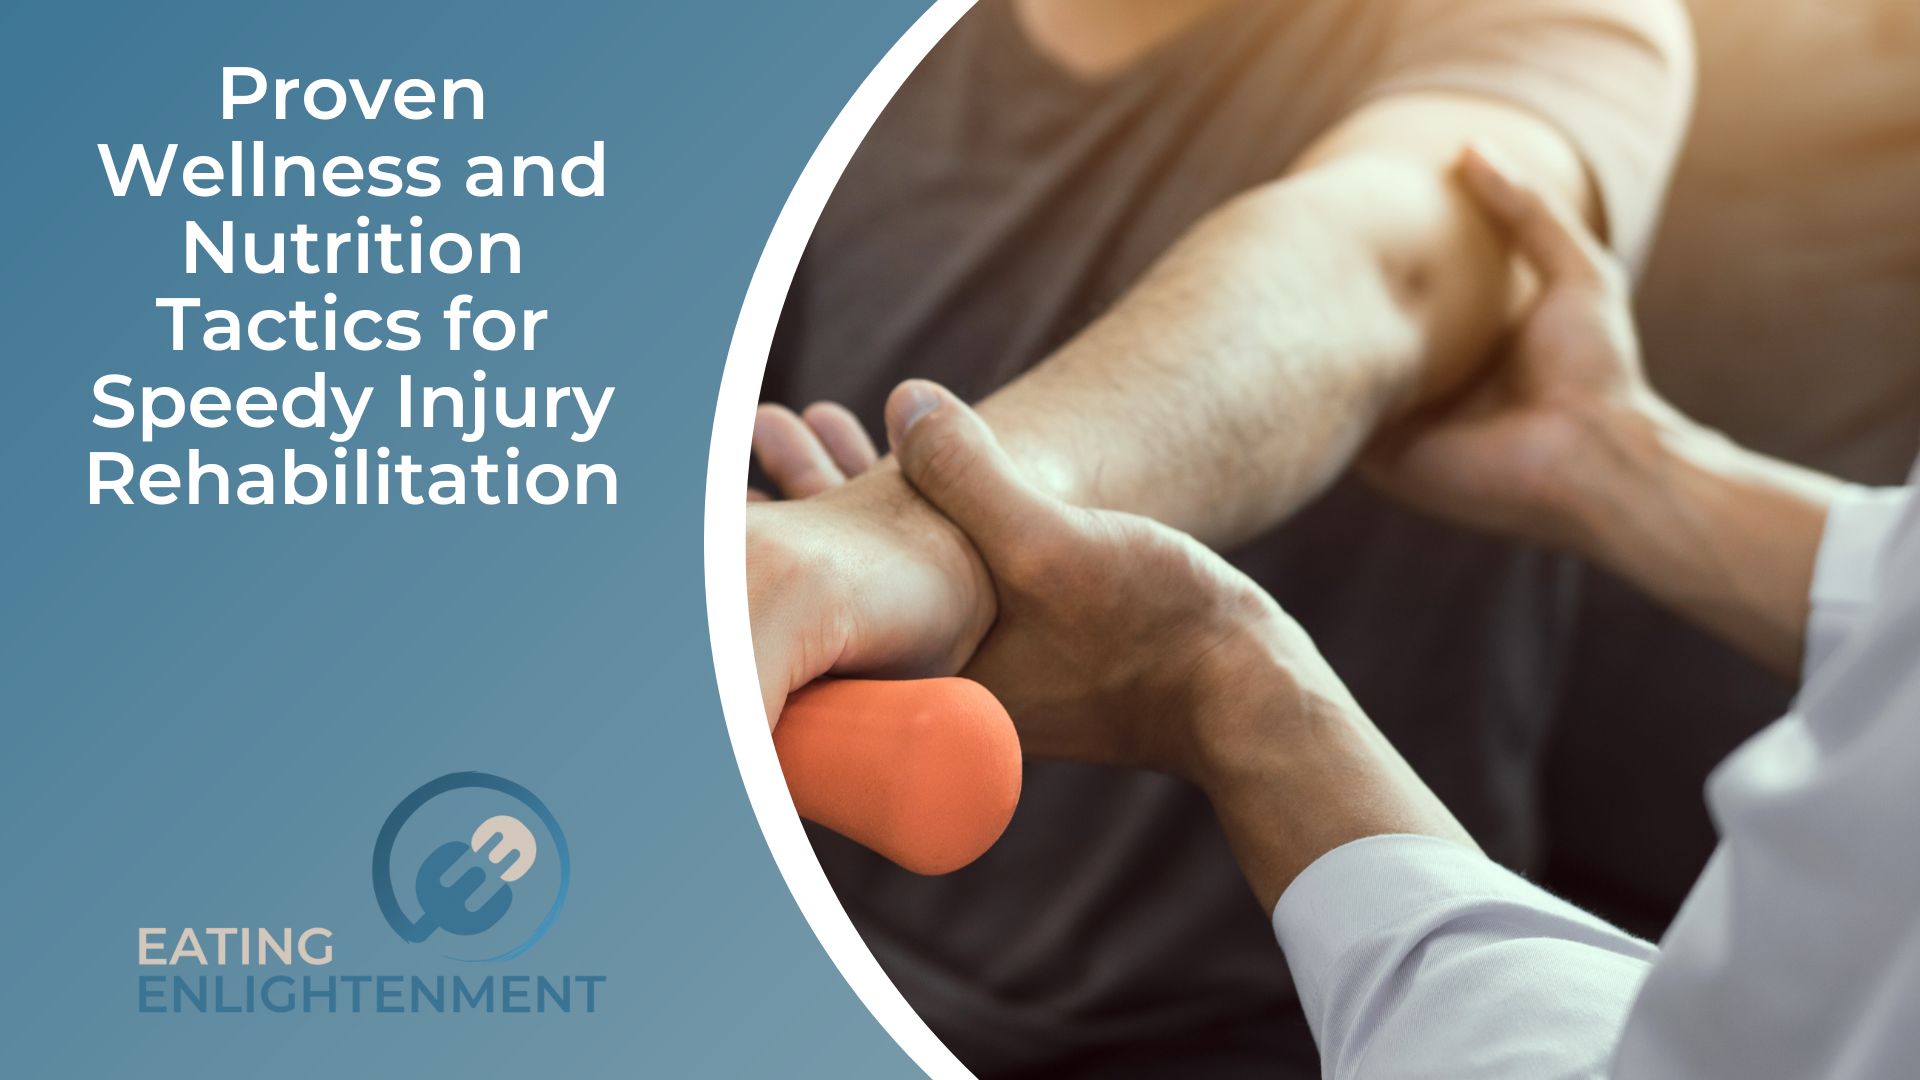 Proven Wellness and Nutrition Tactics for Speedy Injury Rehabilitation